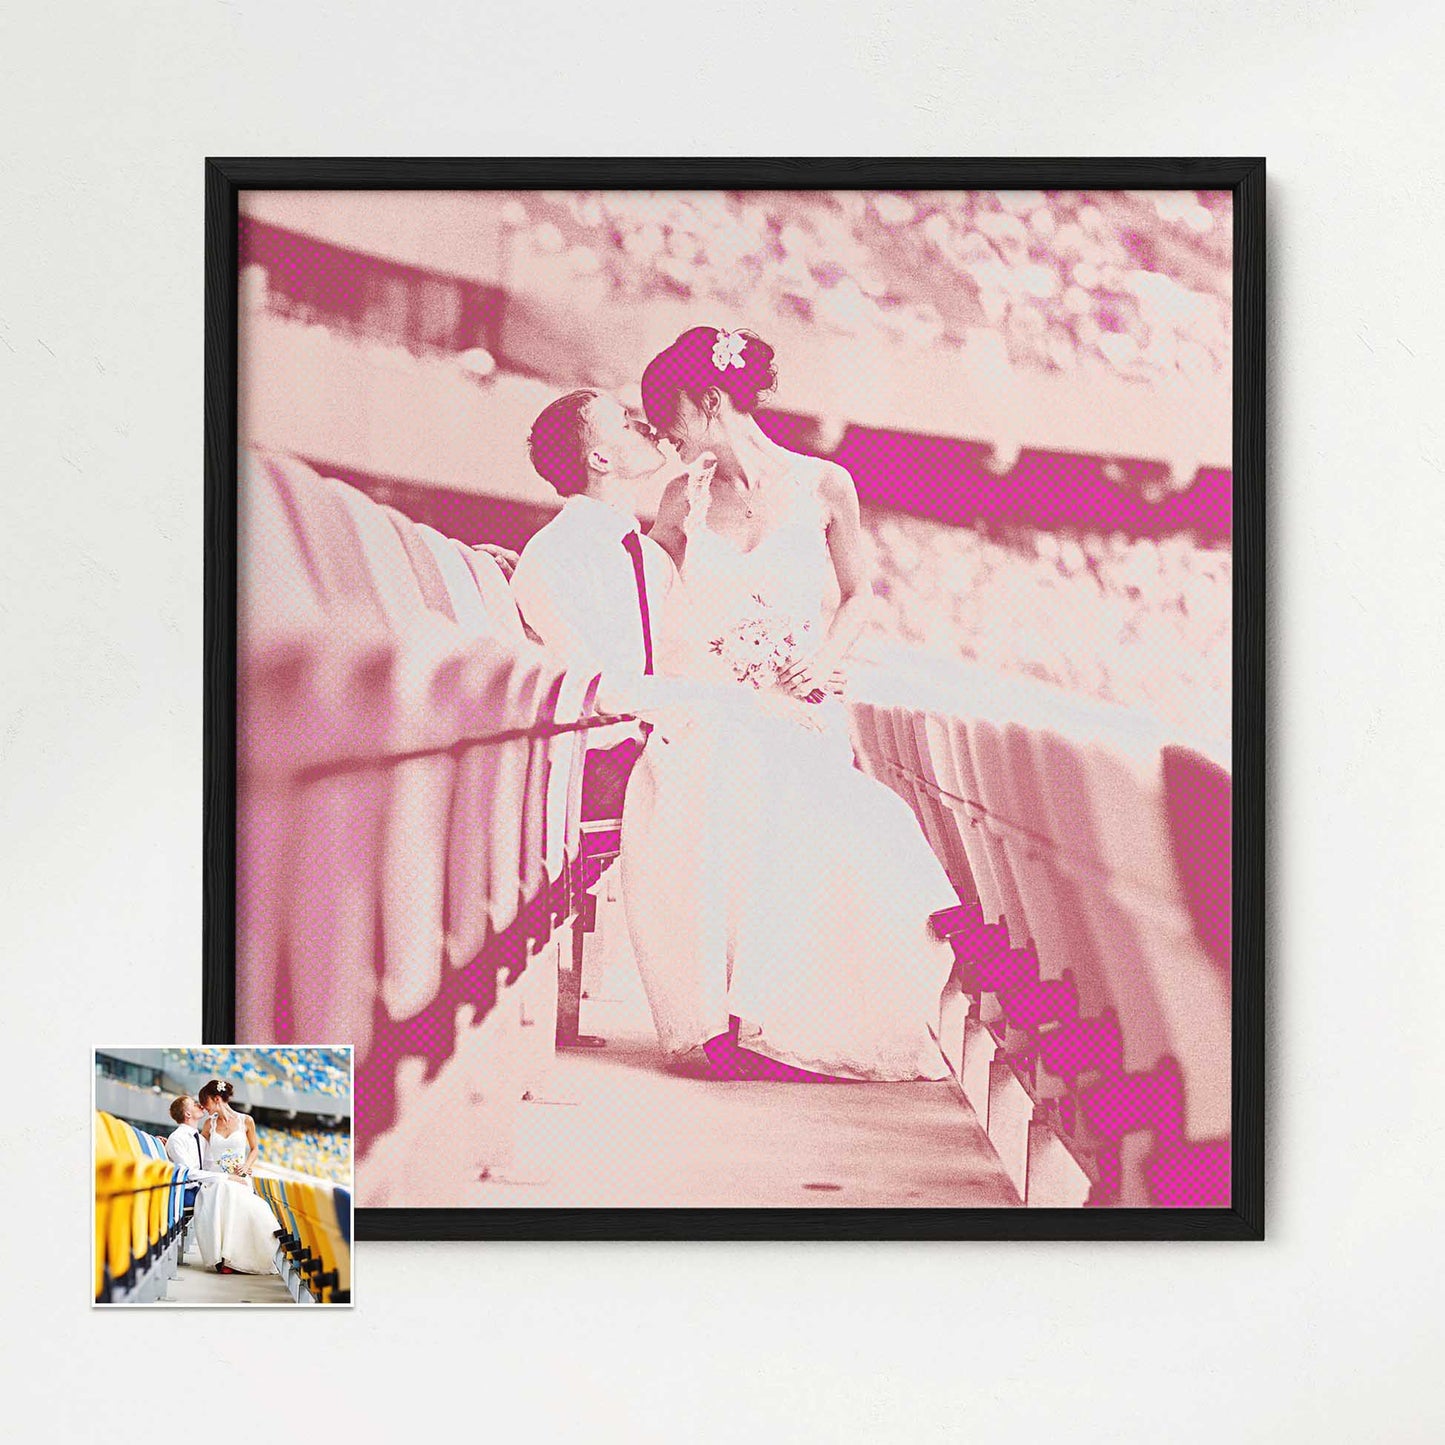 The Personalised Pink Pop Art Framed Print is a vibrant and exciting addition to your home decor. Its pop art style, combined with a halftone effect, creates a cool and vivid aesthetic. Crafted with a wooden frame and printed on gallery-quality